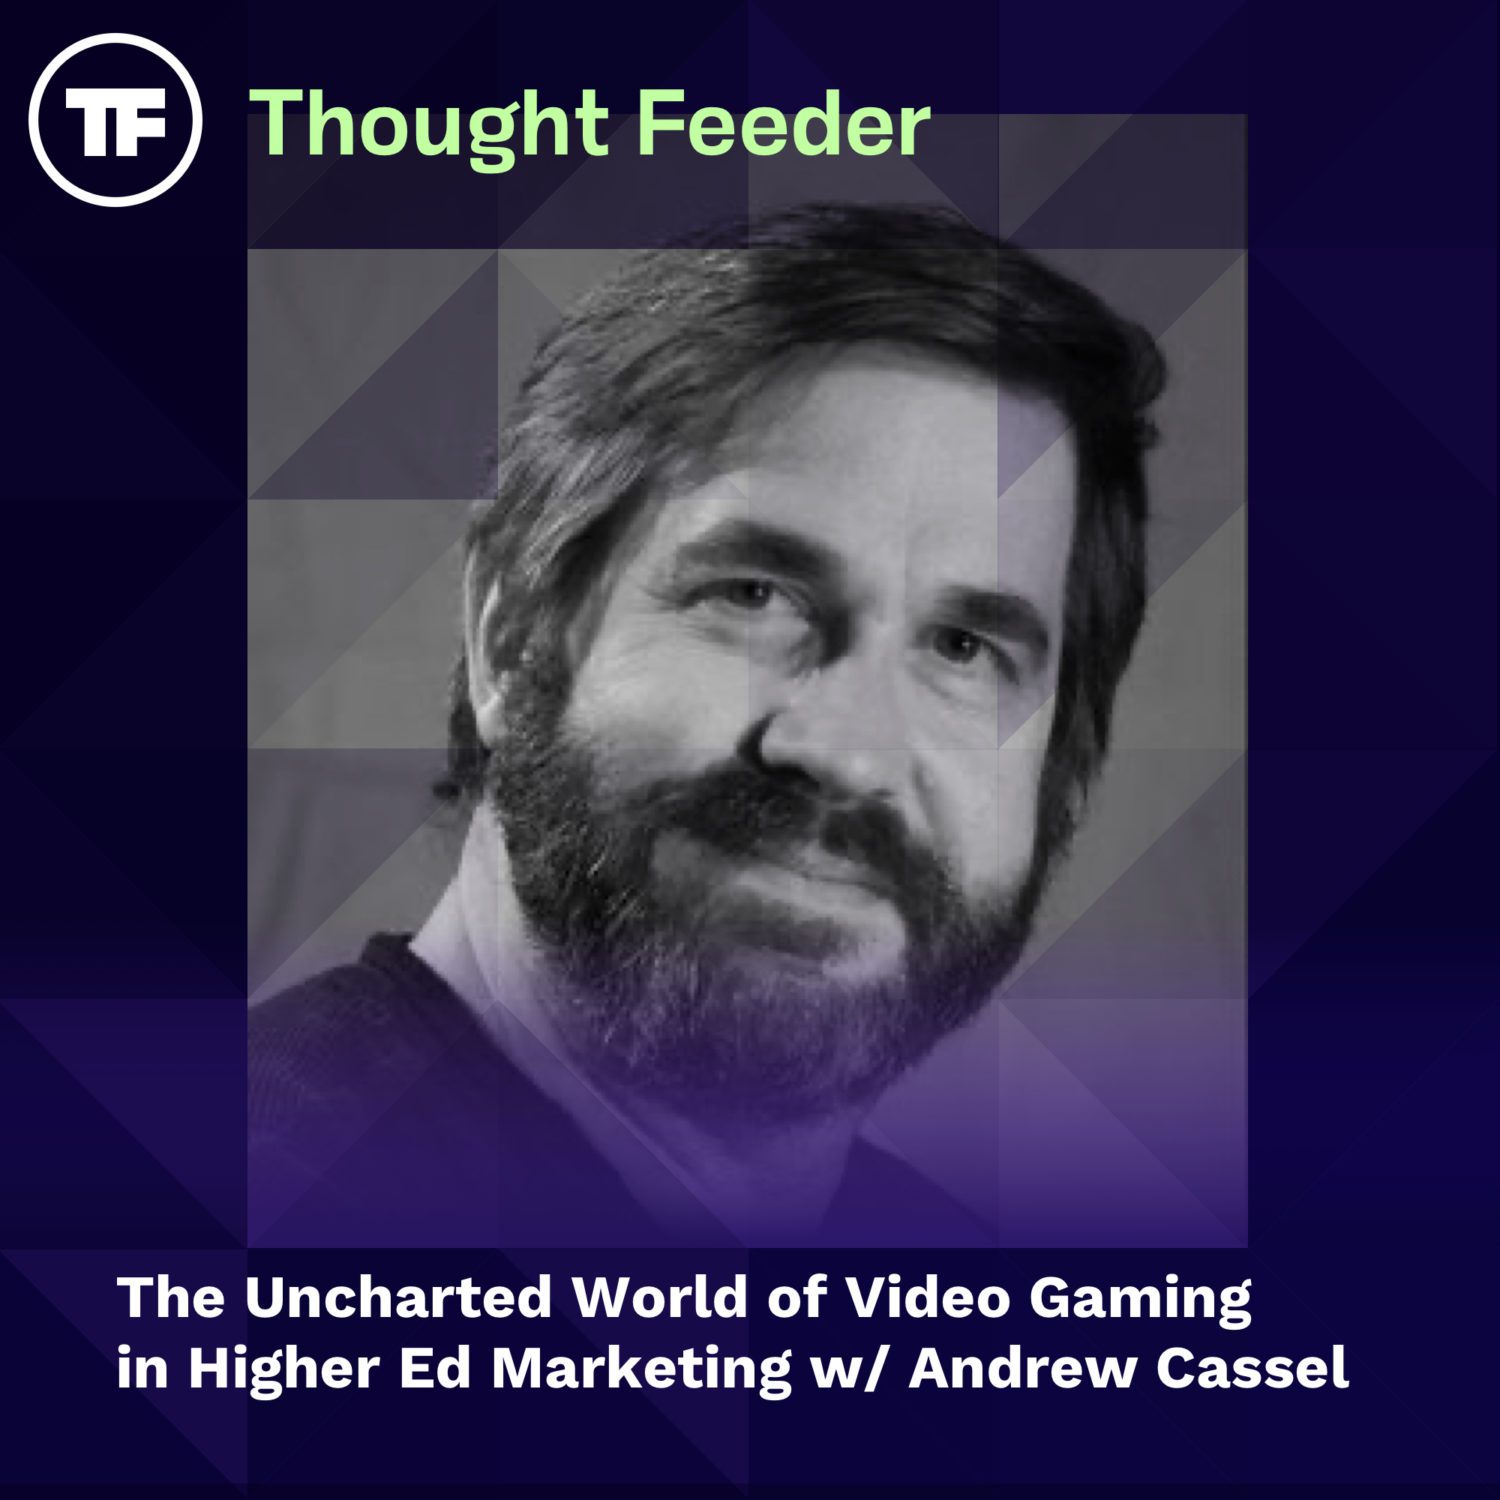 The Uncharted World of Video Gaming in Higher Ed Marketing with Andrew Cassel